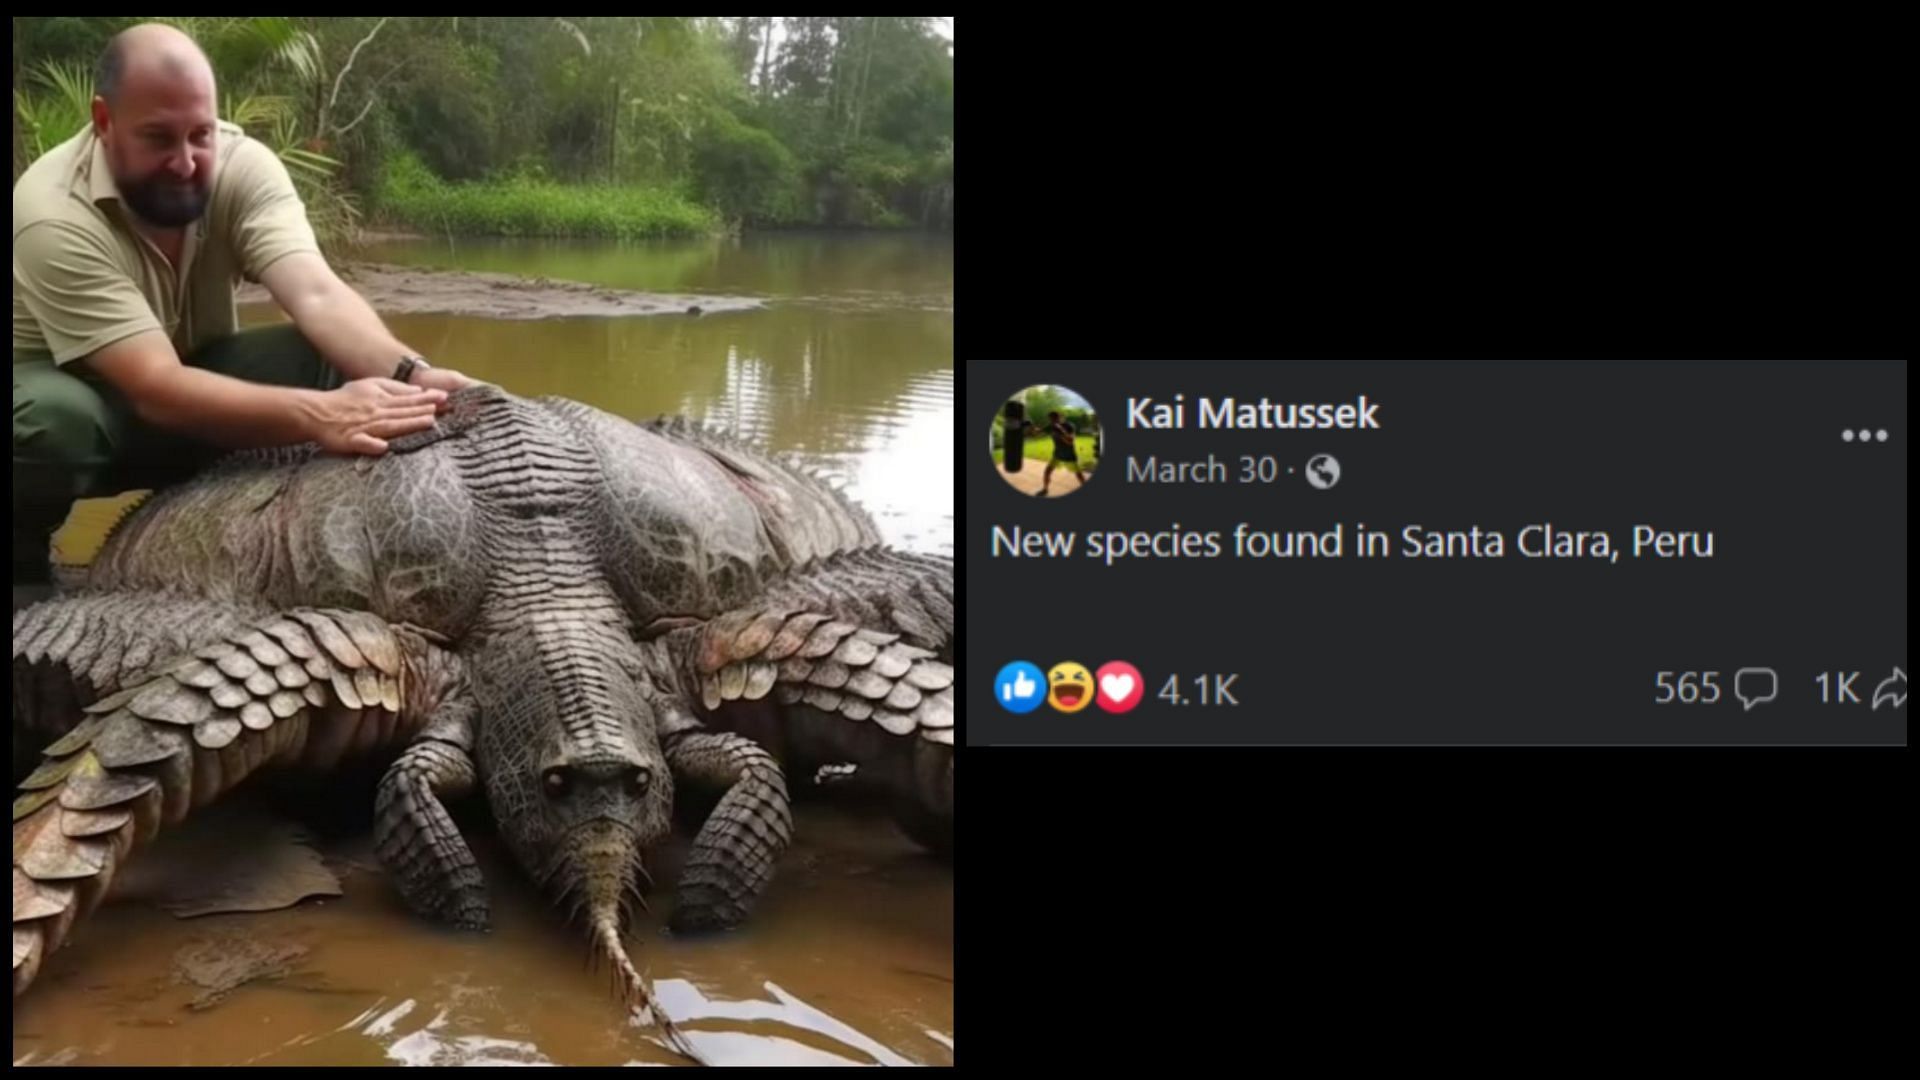 This post, too, claimed that the creature is real (Image via Facebook / Kai Matussek)